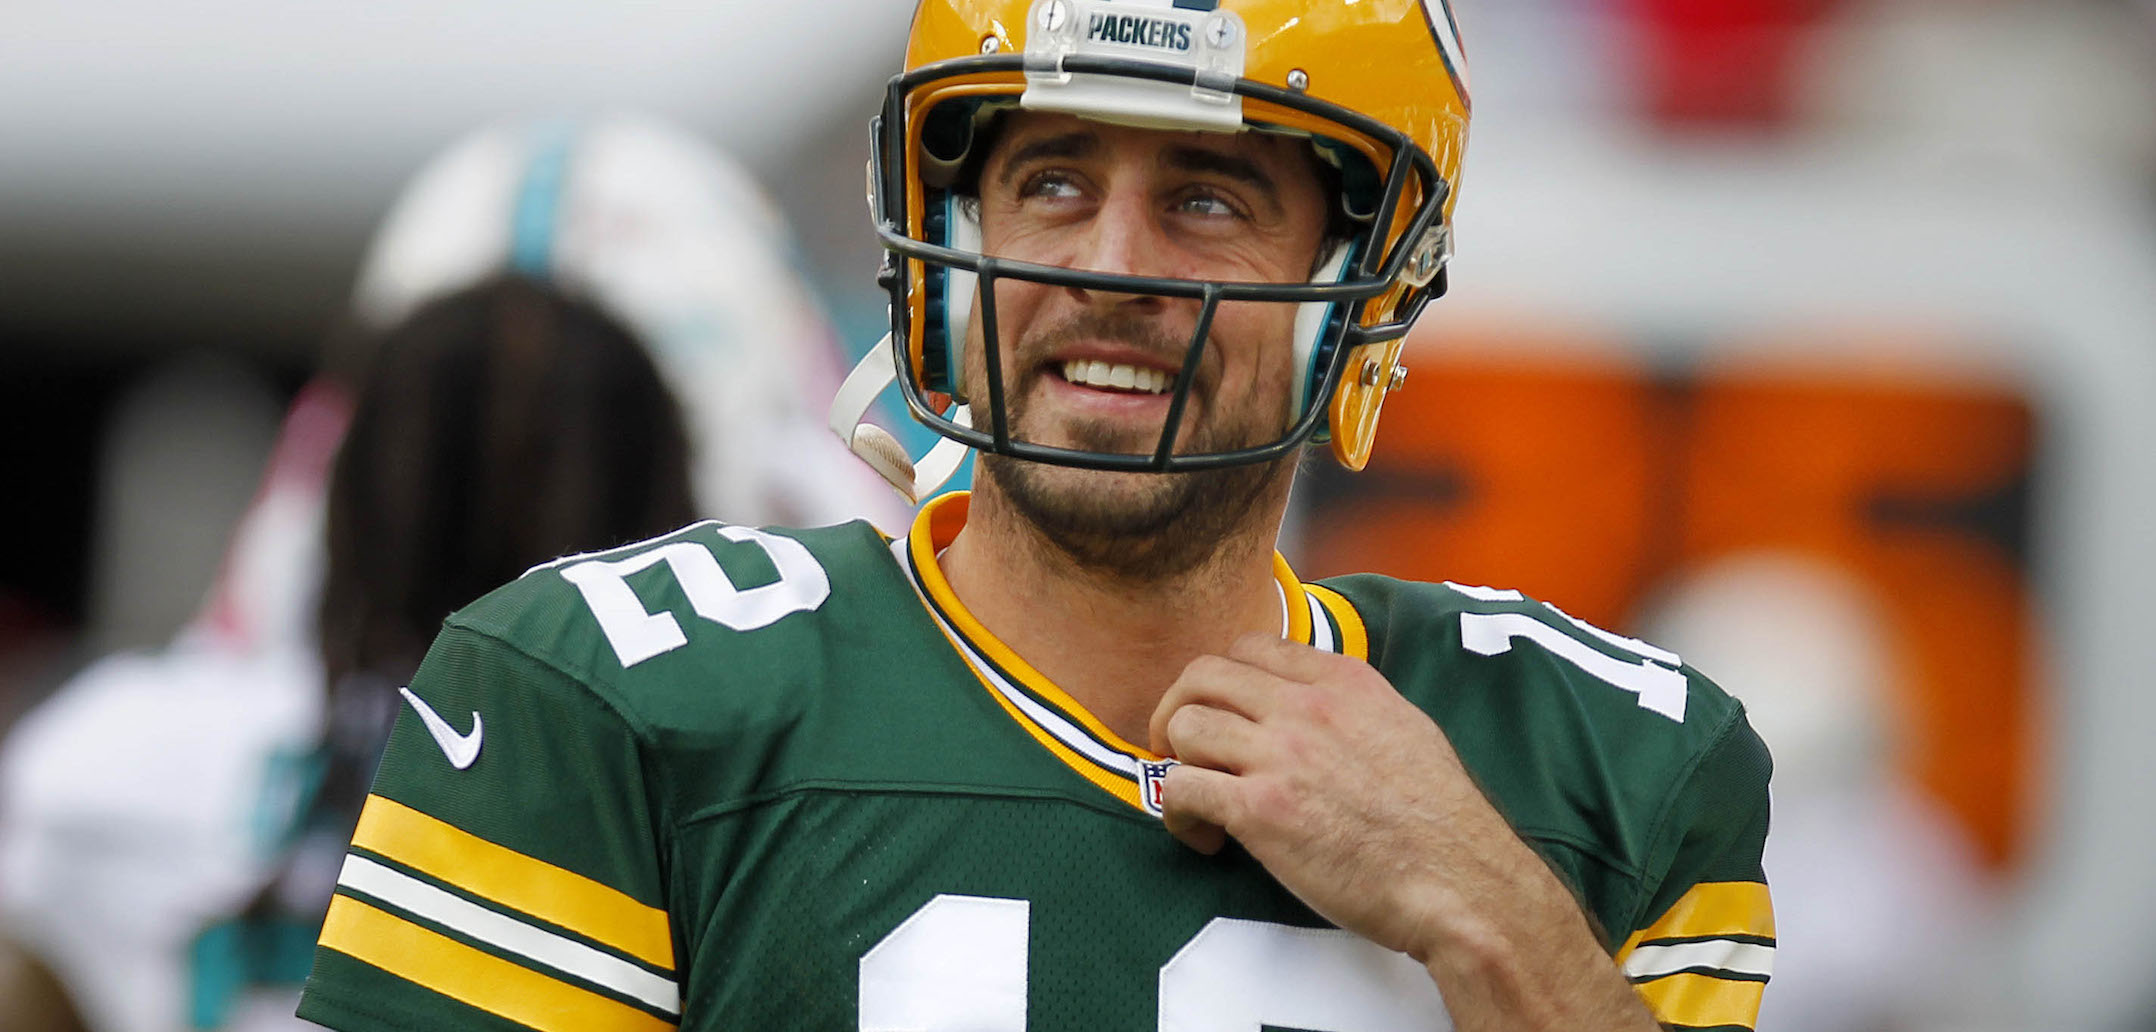 Green Bay Packers quarterback Aaron Rodgers (12) warms up before the Green Bay Packers-Miami Dolphins NFL football game at Sun Life Stadium in Miami Gardens, Florida on Sunday, October 12, 2014. Milwaukee Journal Sentinel photo by Rick Wood/RWOOD@JOURNALSENTINEL